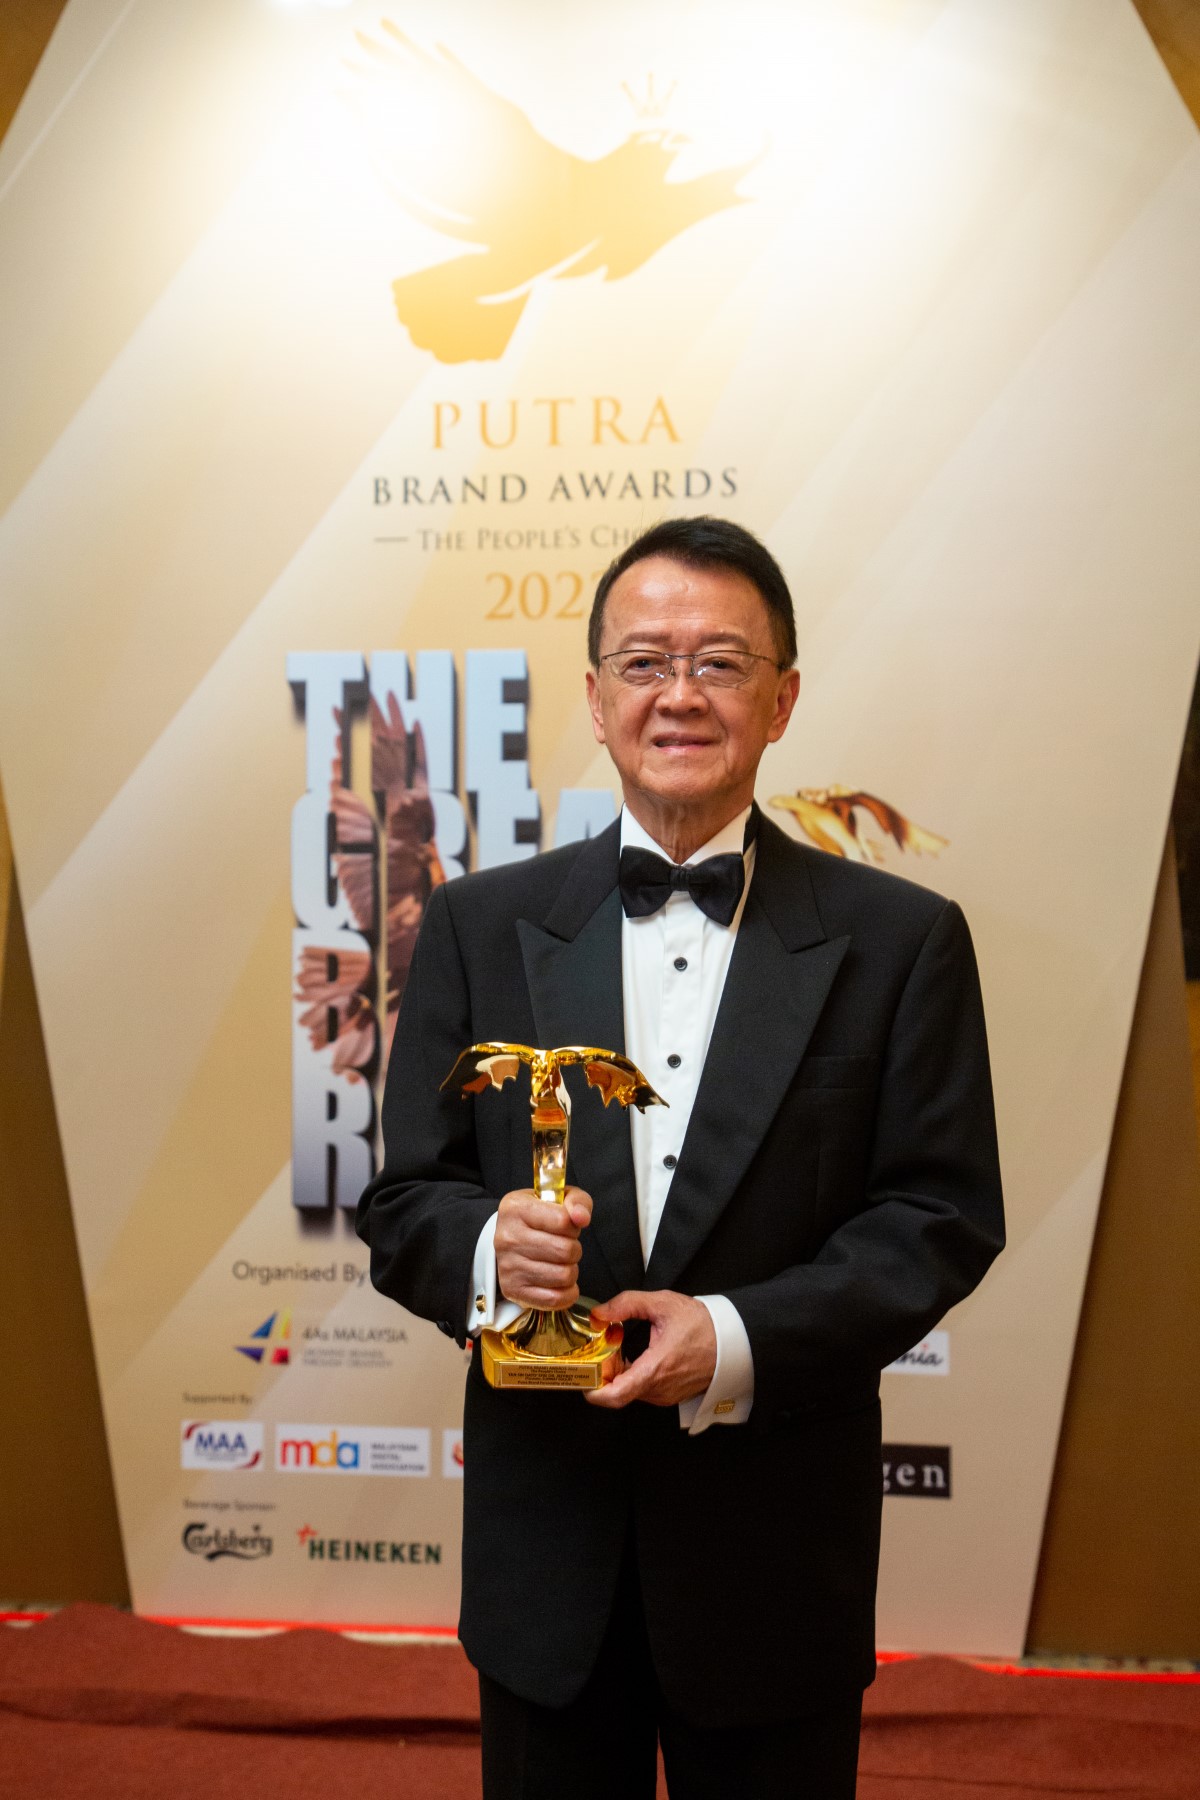 Tan Sri Dr. Jeffrey Cheah holding up the Putra Brand Awards trophy – shaped in the golden eagle amidst the gold Putra Brand Awards backdrop.